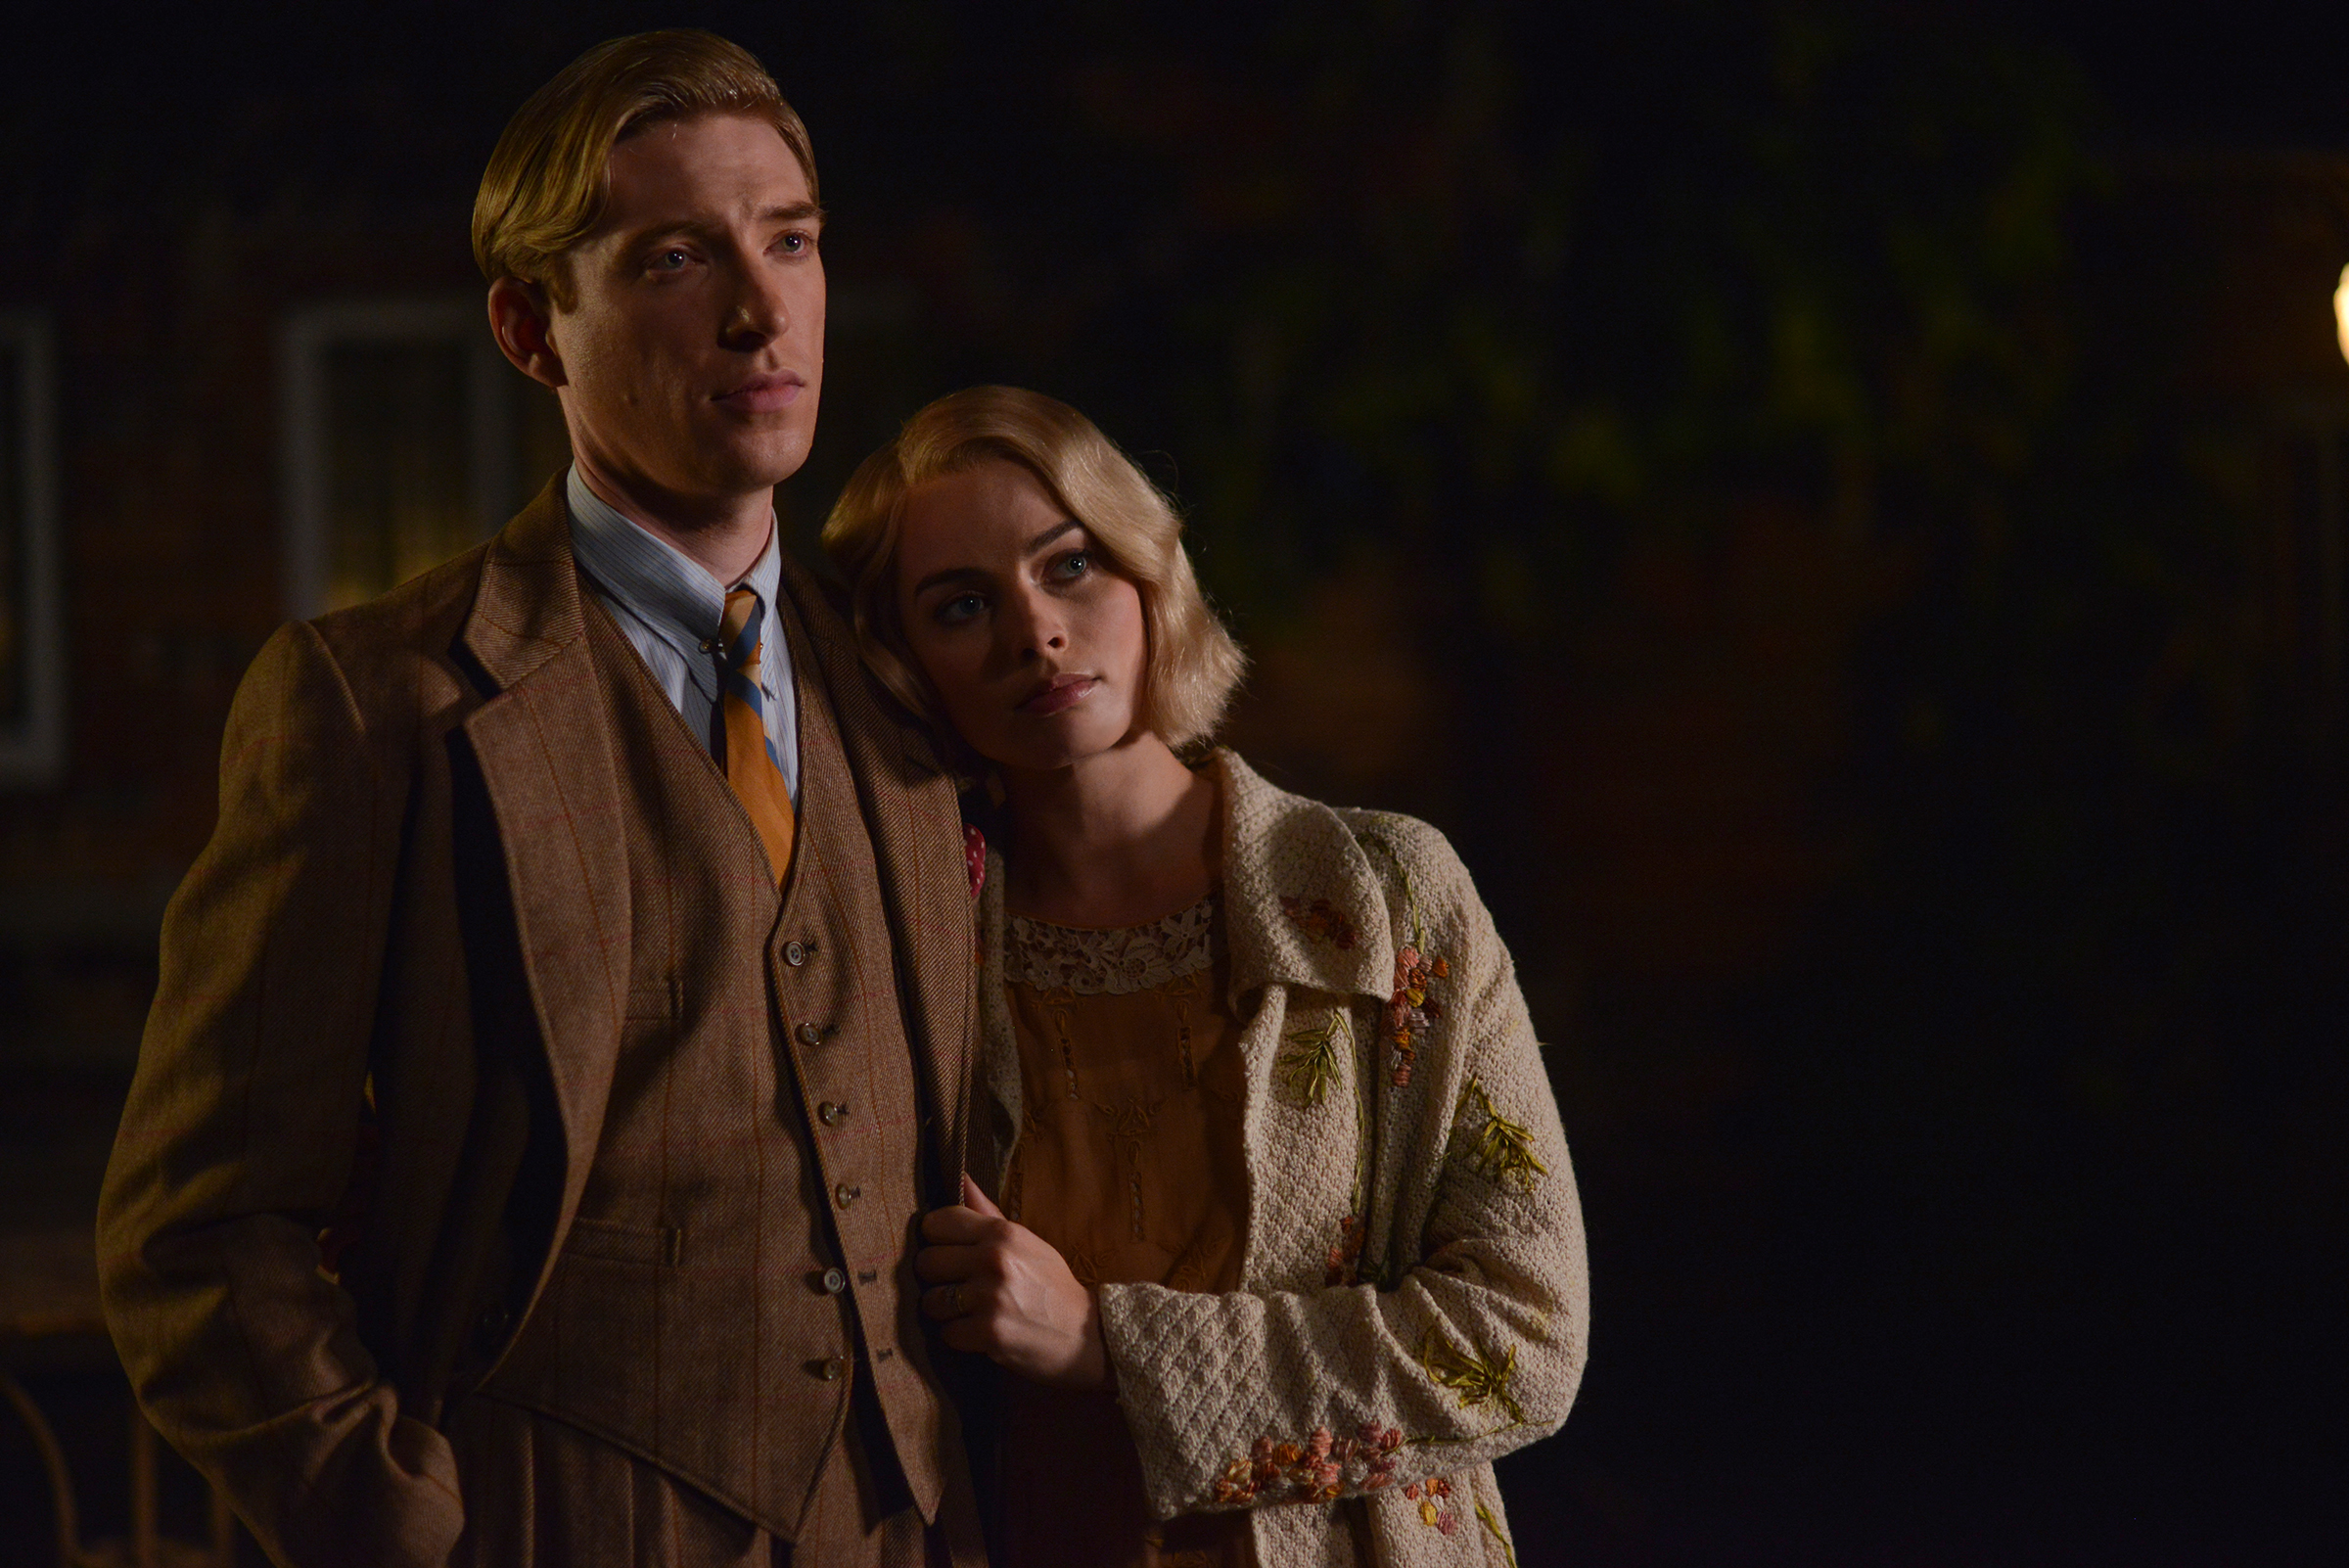  Domhnall Gleeson as 'Alan Milne' and Margot Robbie as 'Daphne Milne' in the film UNTITLED A.A. MILNE. Photo by David Appleby. &copy; 2017 Fox Searchlight Pictures 